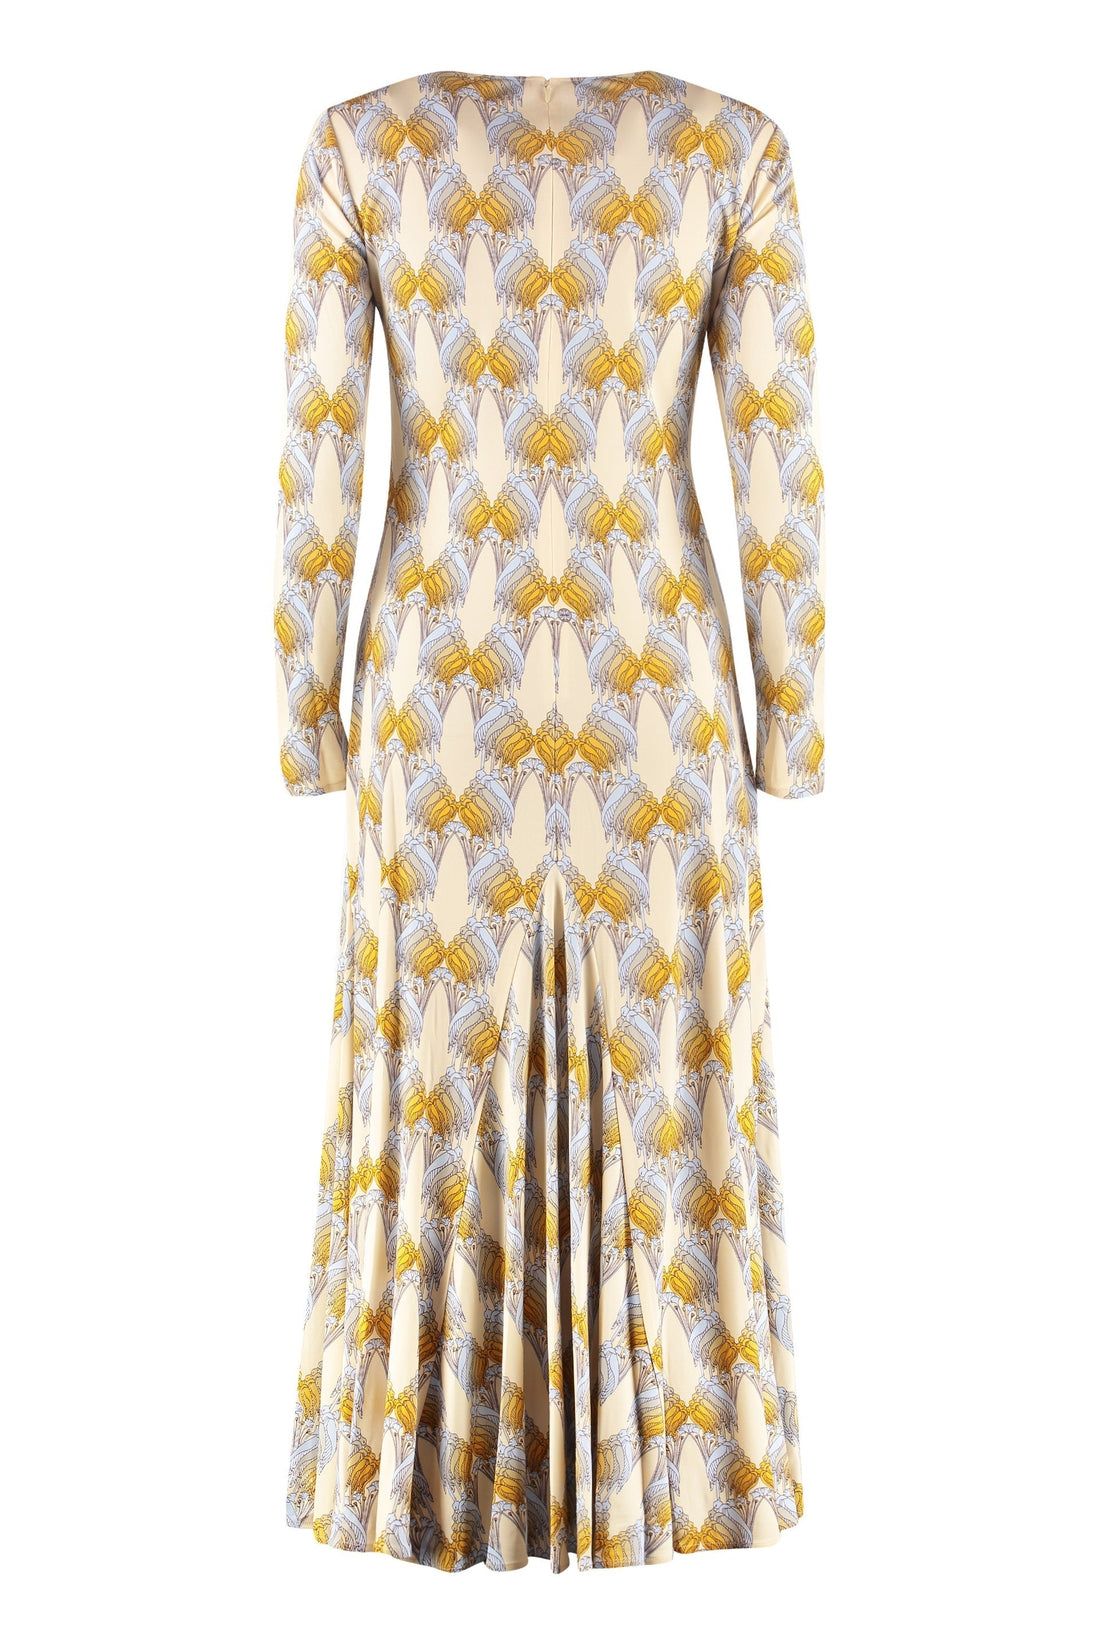 Tory Burch-OUTLET-SALE-Printed flared dress-ARCHIVIST